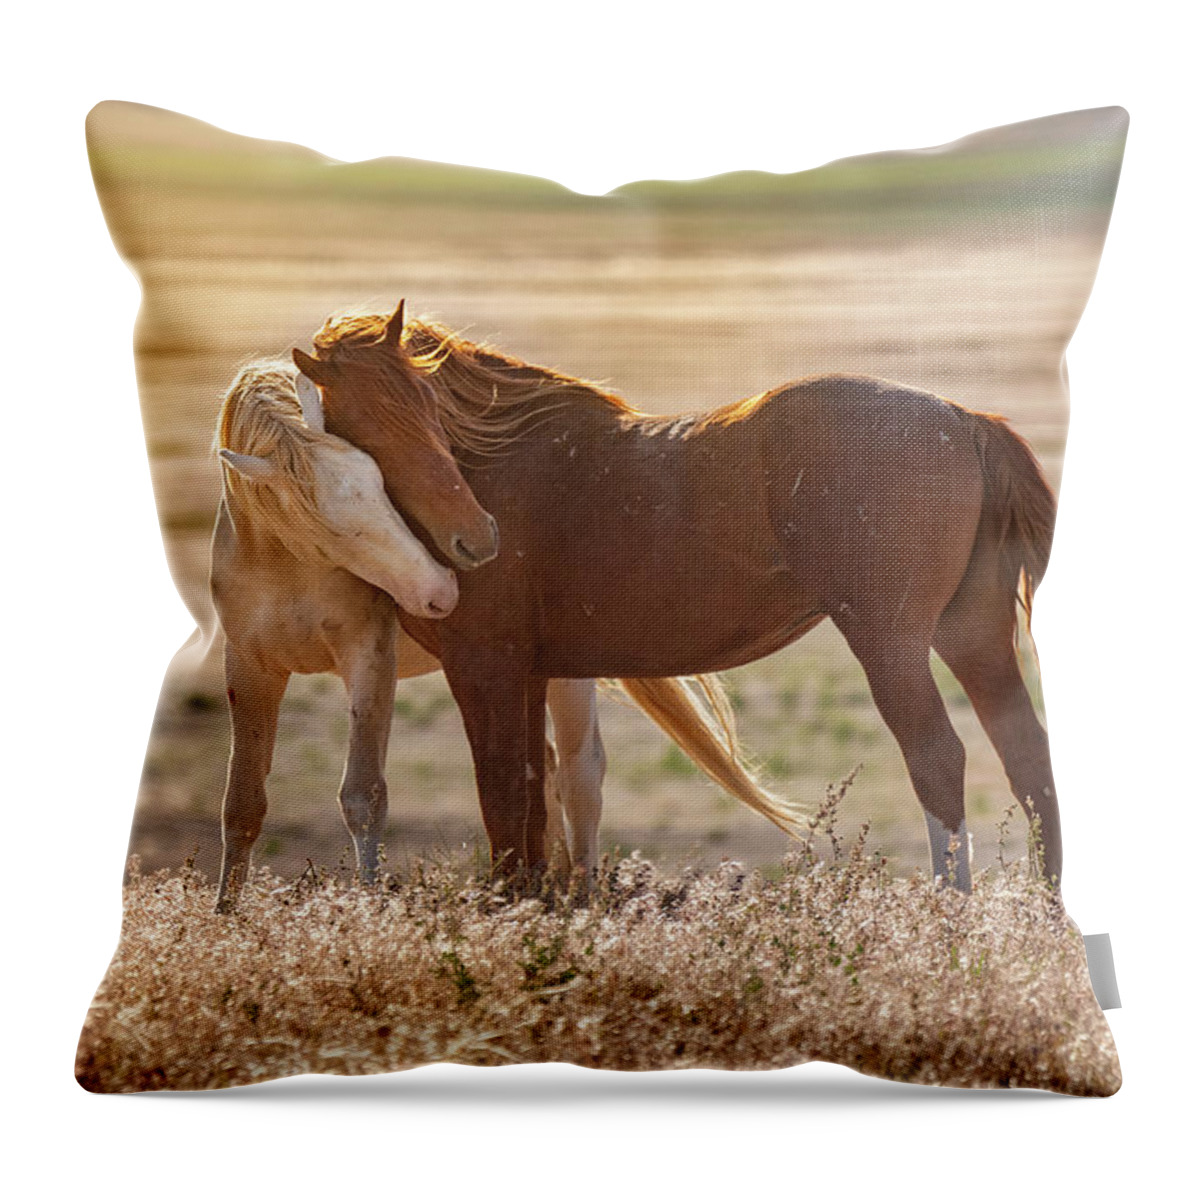 Horses Throw Pillow featuring the photograph Horse Love by Michael Ash